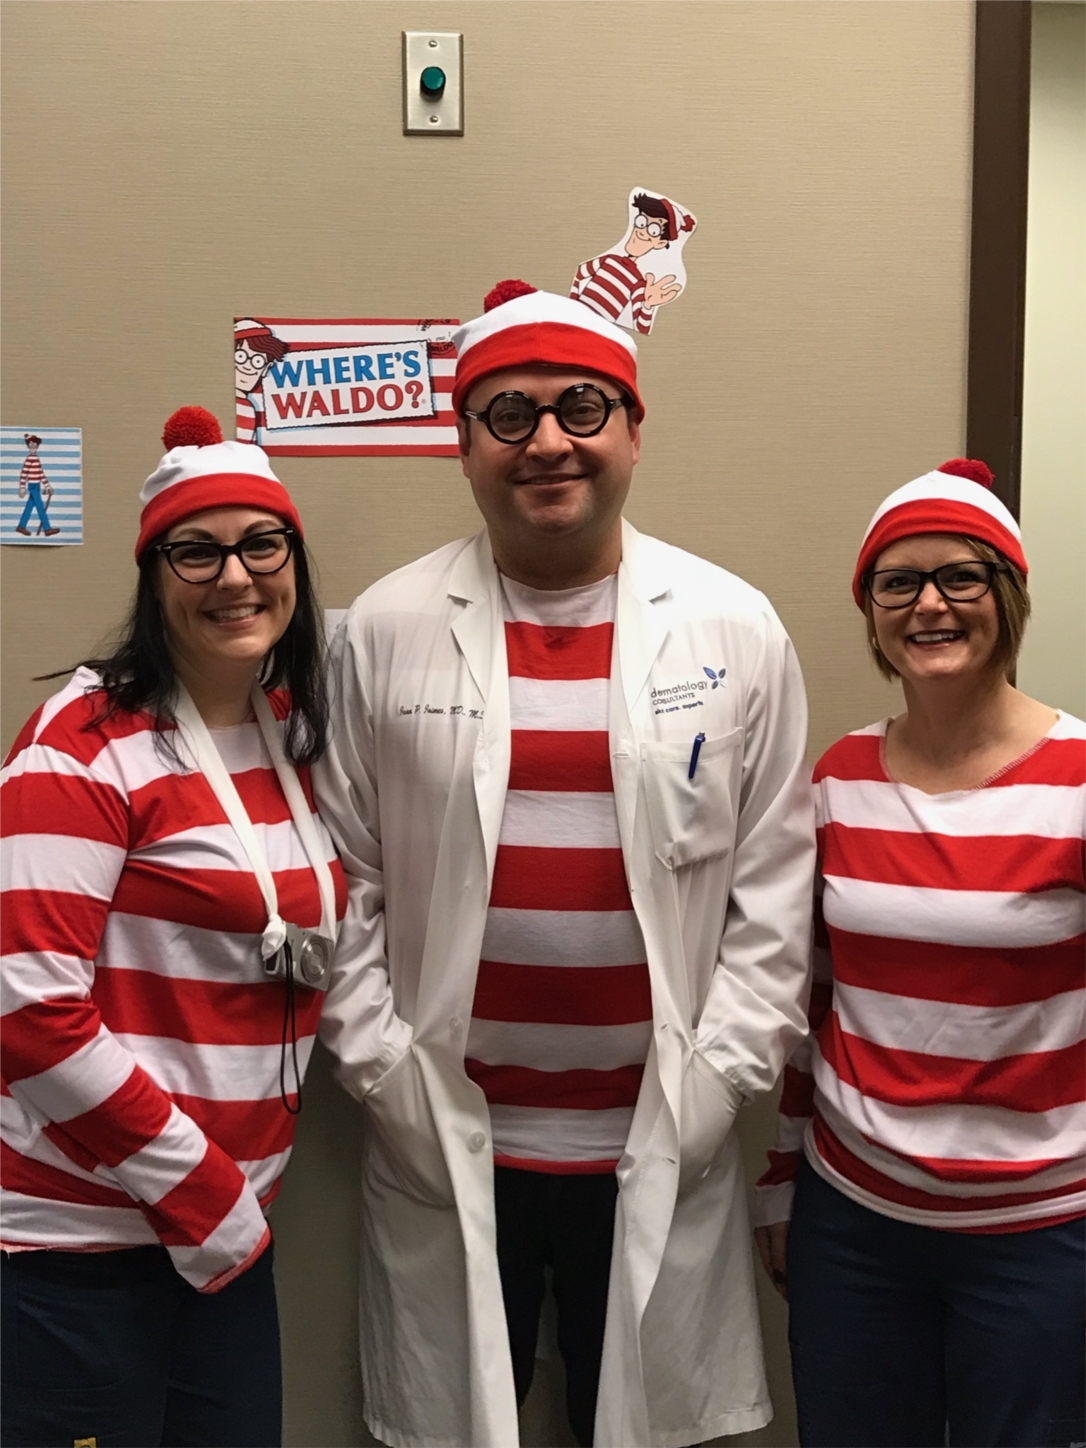 Where's Waldo? Halloween is always a fun time at the clinic.